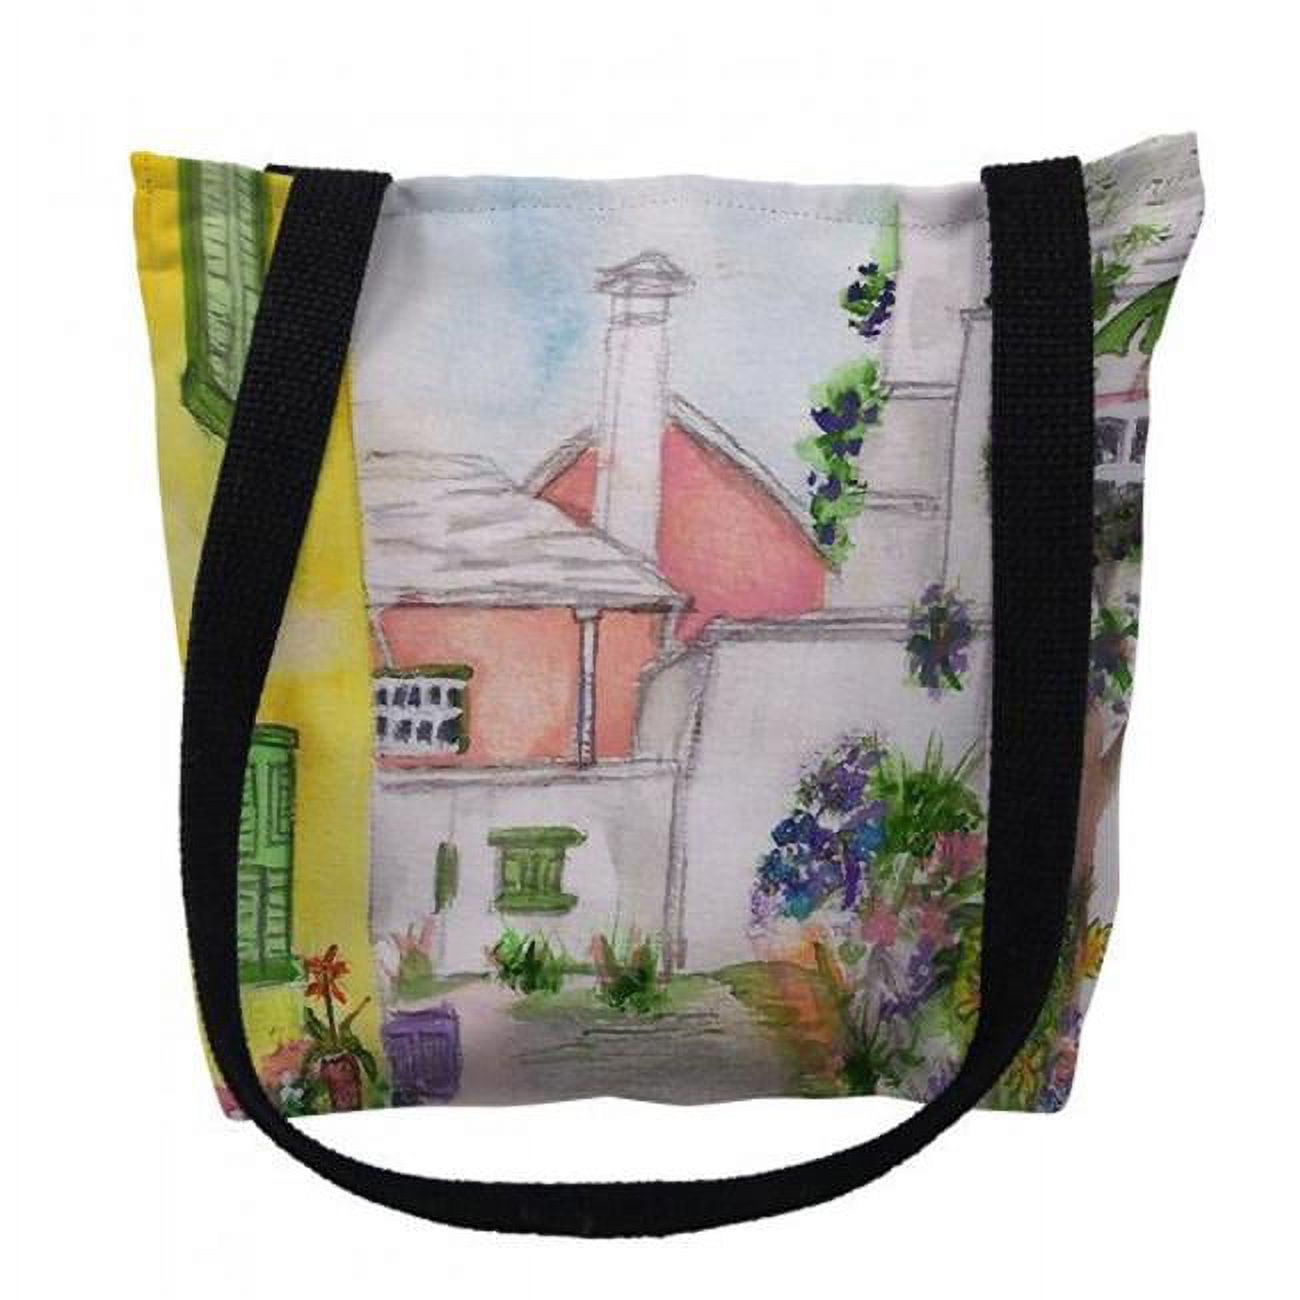 Ty108m 16 X 16 In. Yellow House Tote Bag - Medium